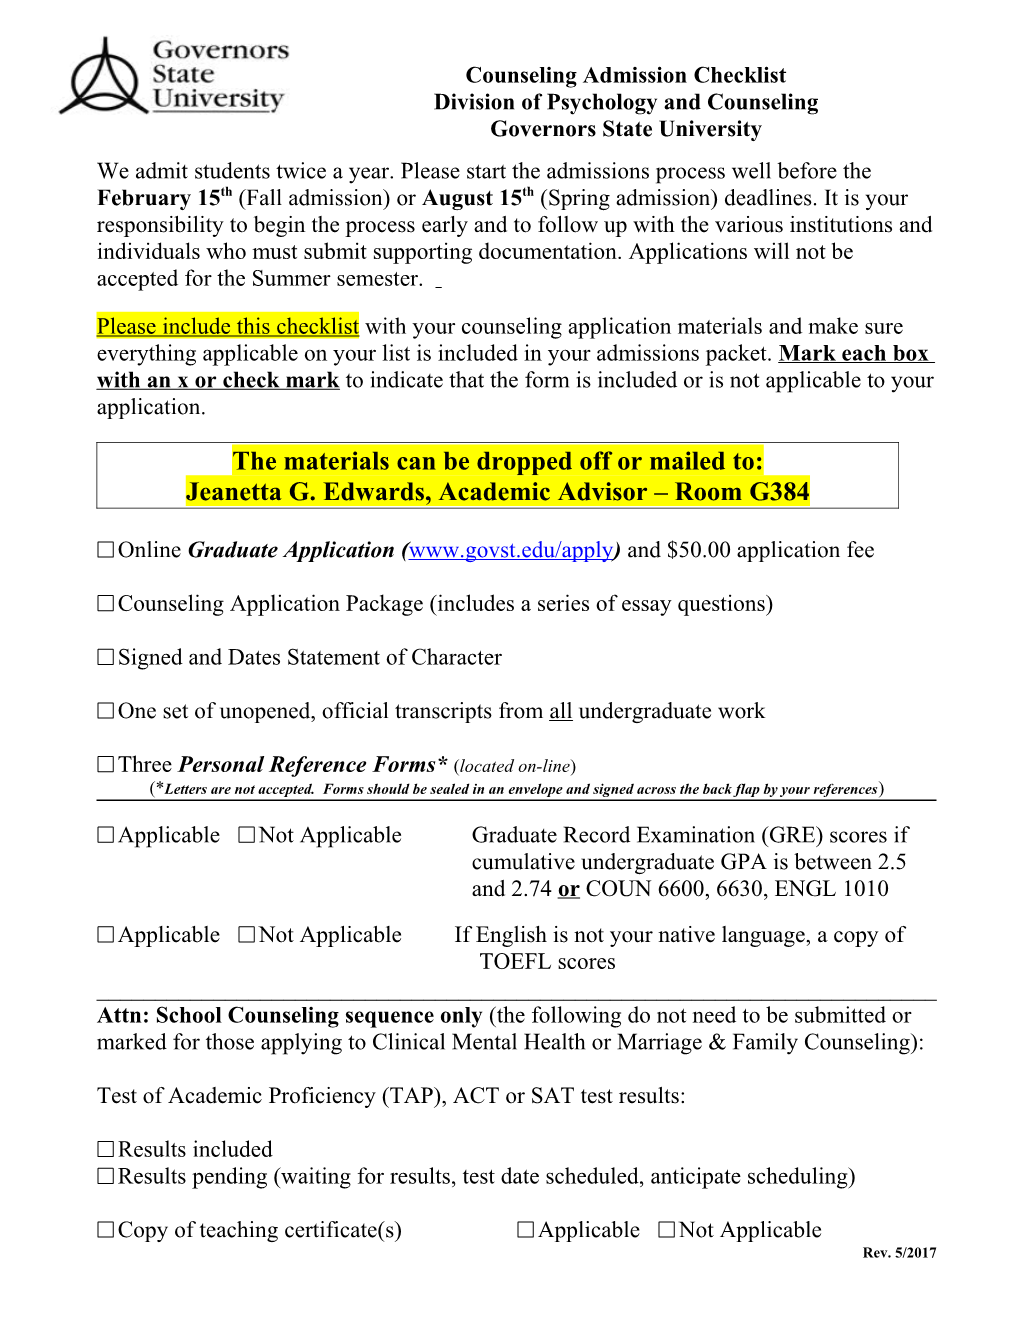 Counseling Admission Checklist